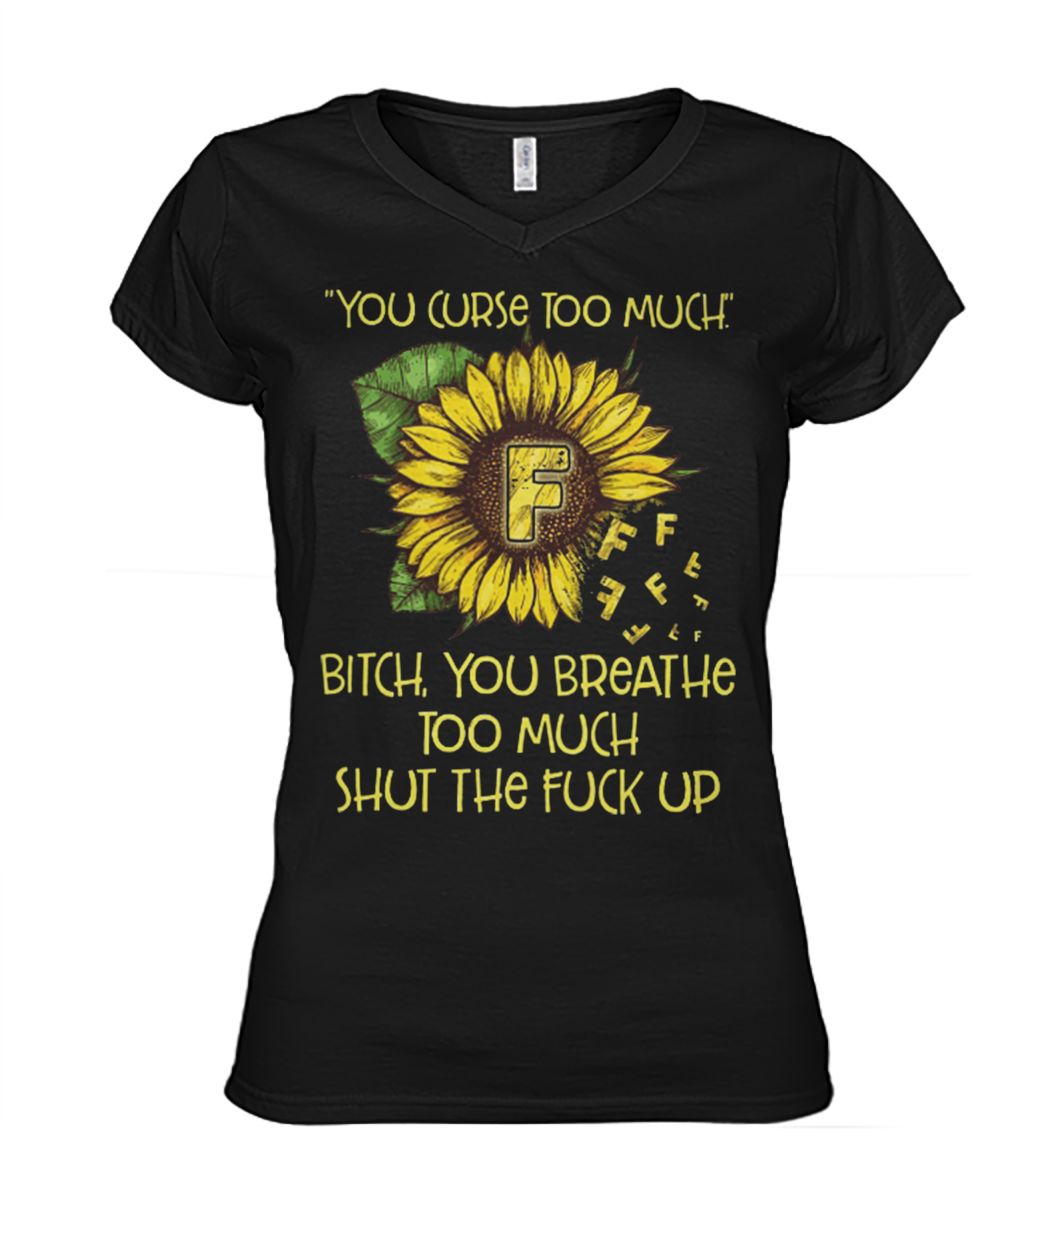 Sunflower you curse too much bitch you breathe too much shut the fuck up women's v-neck